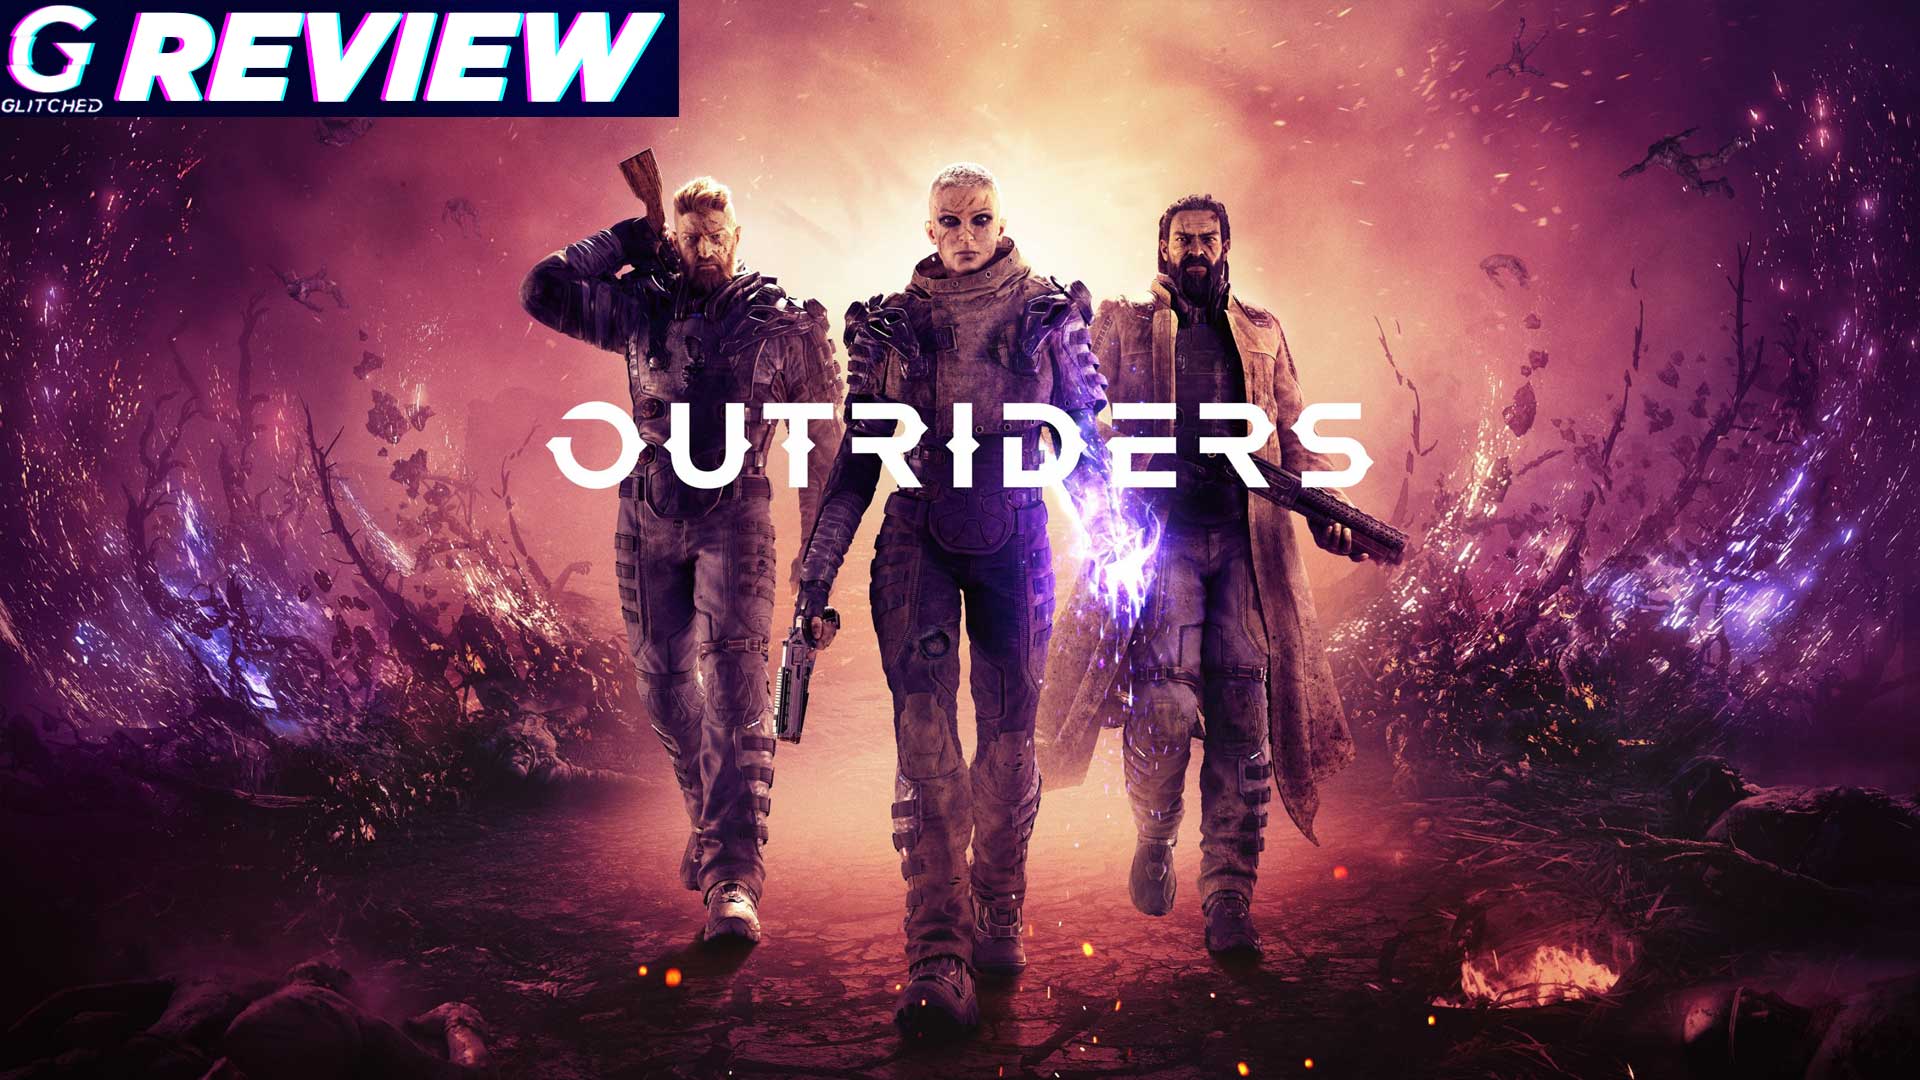 Outriders Review – Unbalanced, Shallow RPG Best Forgotten